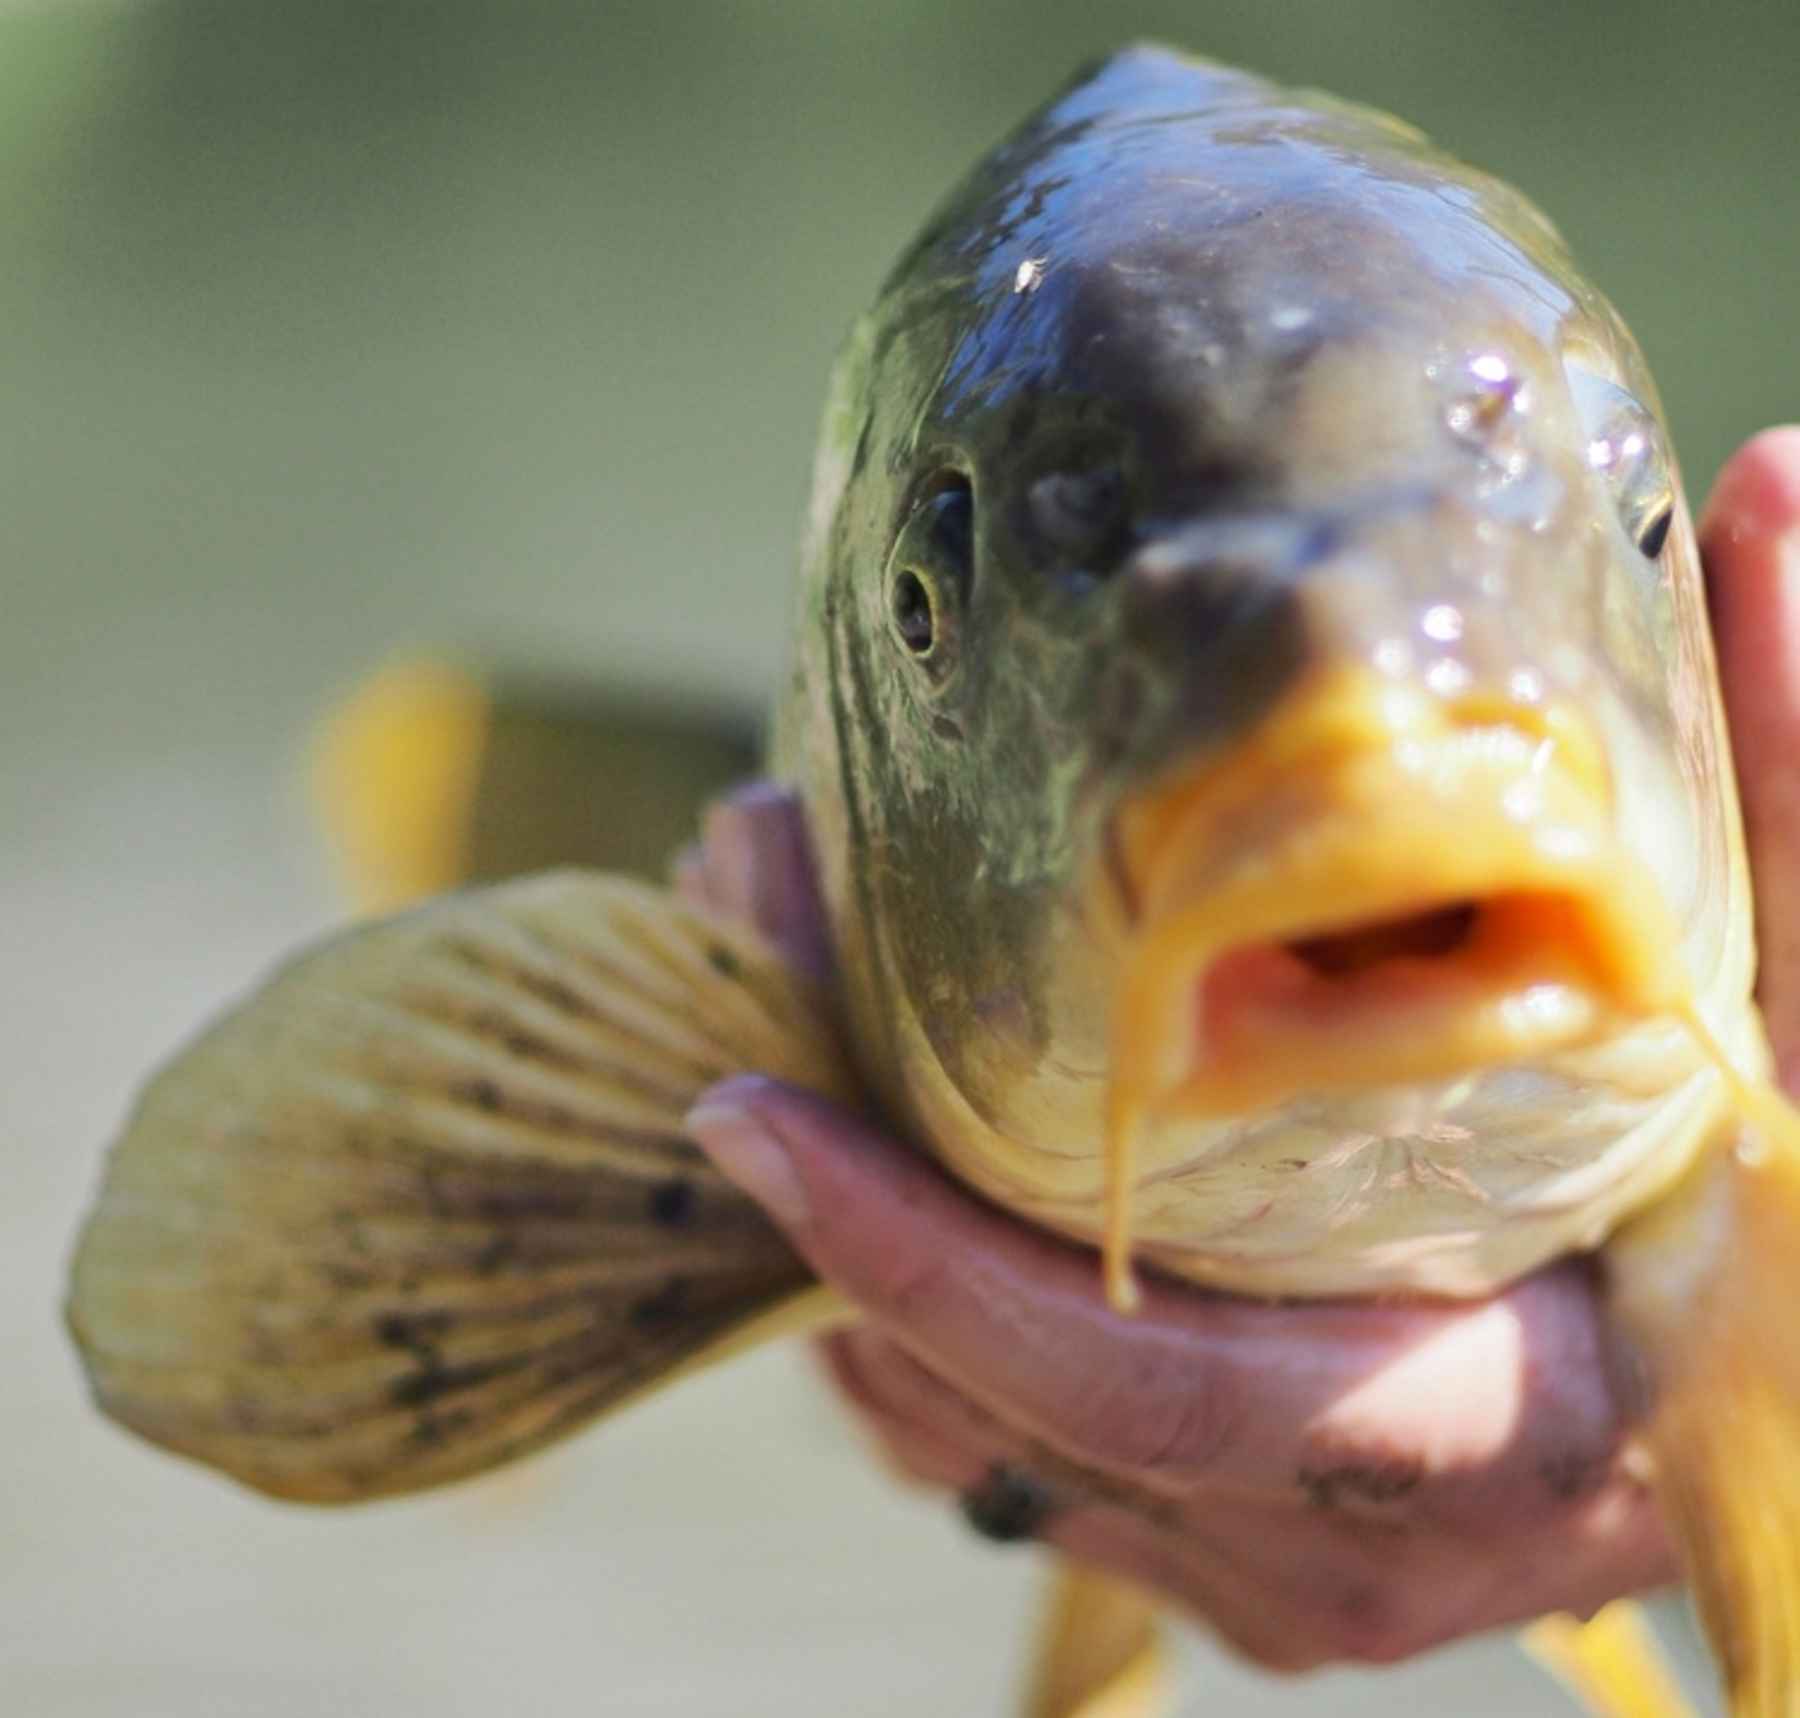 Carp fishing, What gear, bait to use in Boise ponds